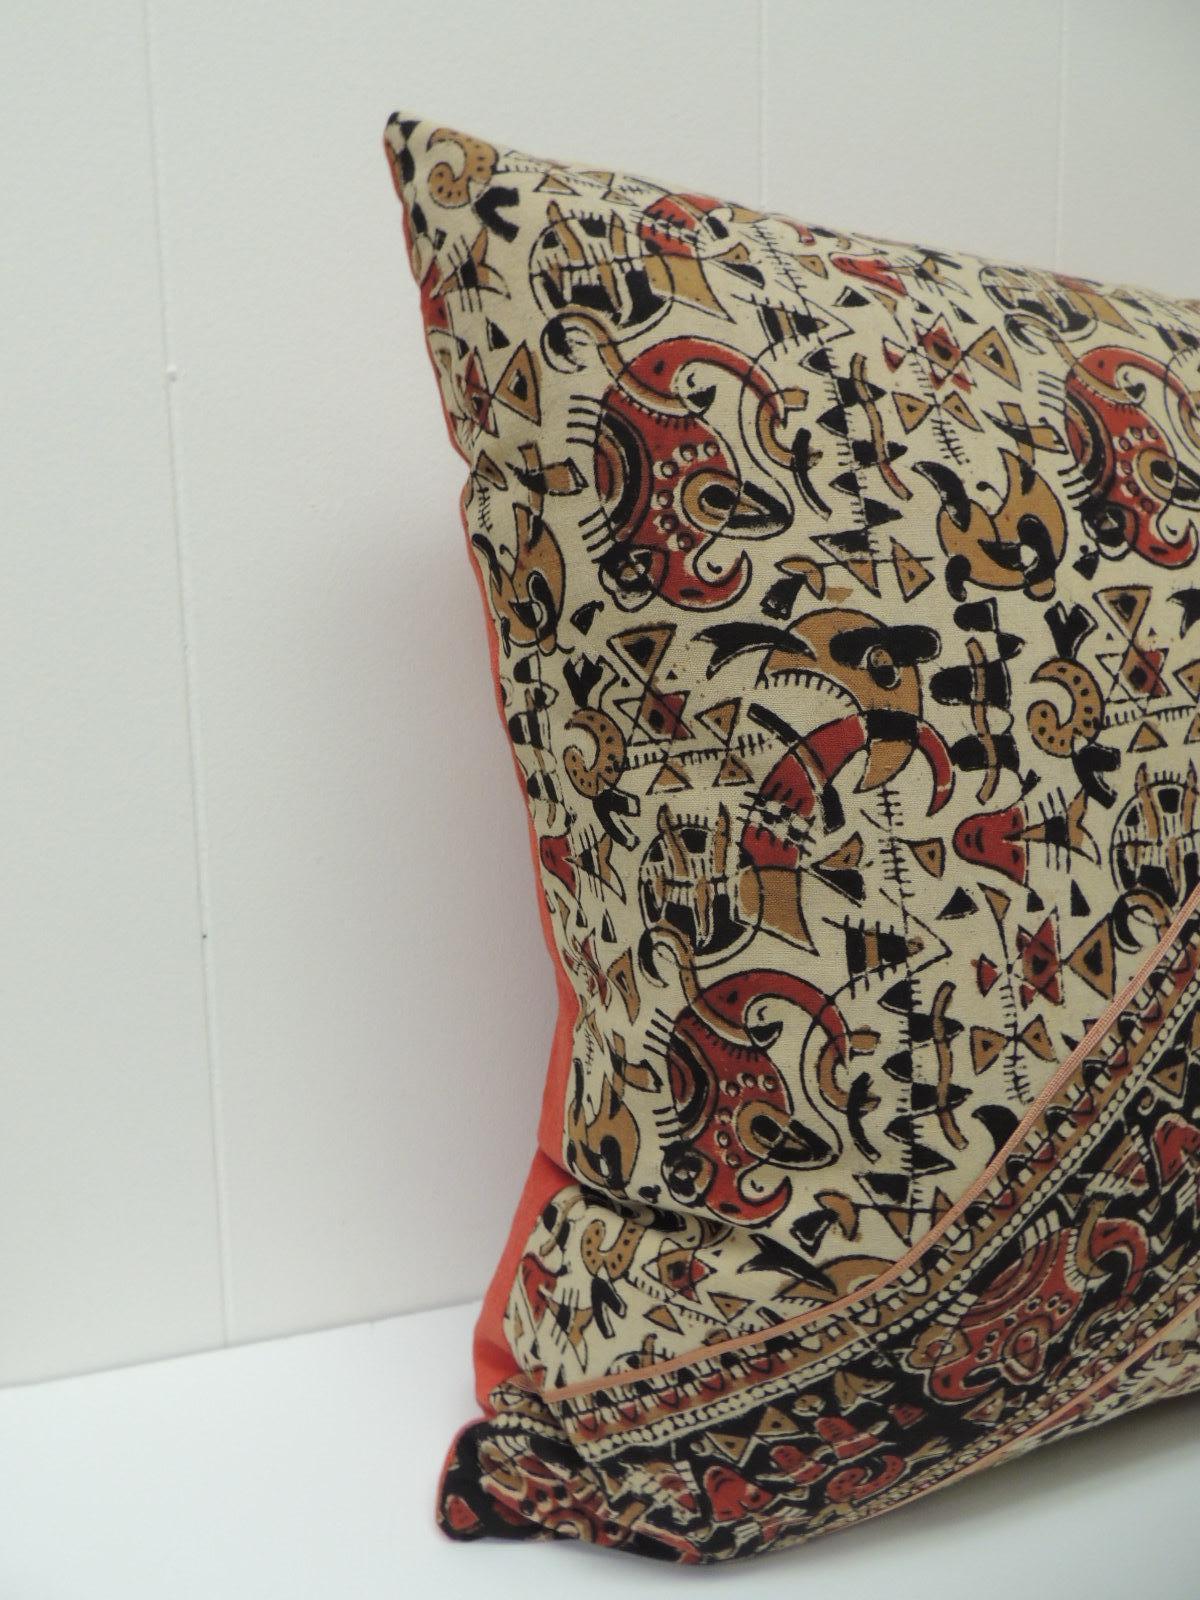 Vintage Persian hand-blocked artisanal Kalamkari textile in the front of the square throw pillow with diagonal stripe to create a mirrored image. Decorative textile pattern is floral with stripes and with geometrical accents on the vintage throw